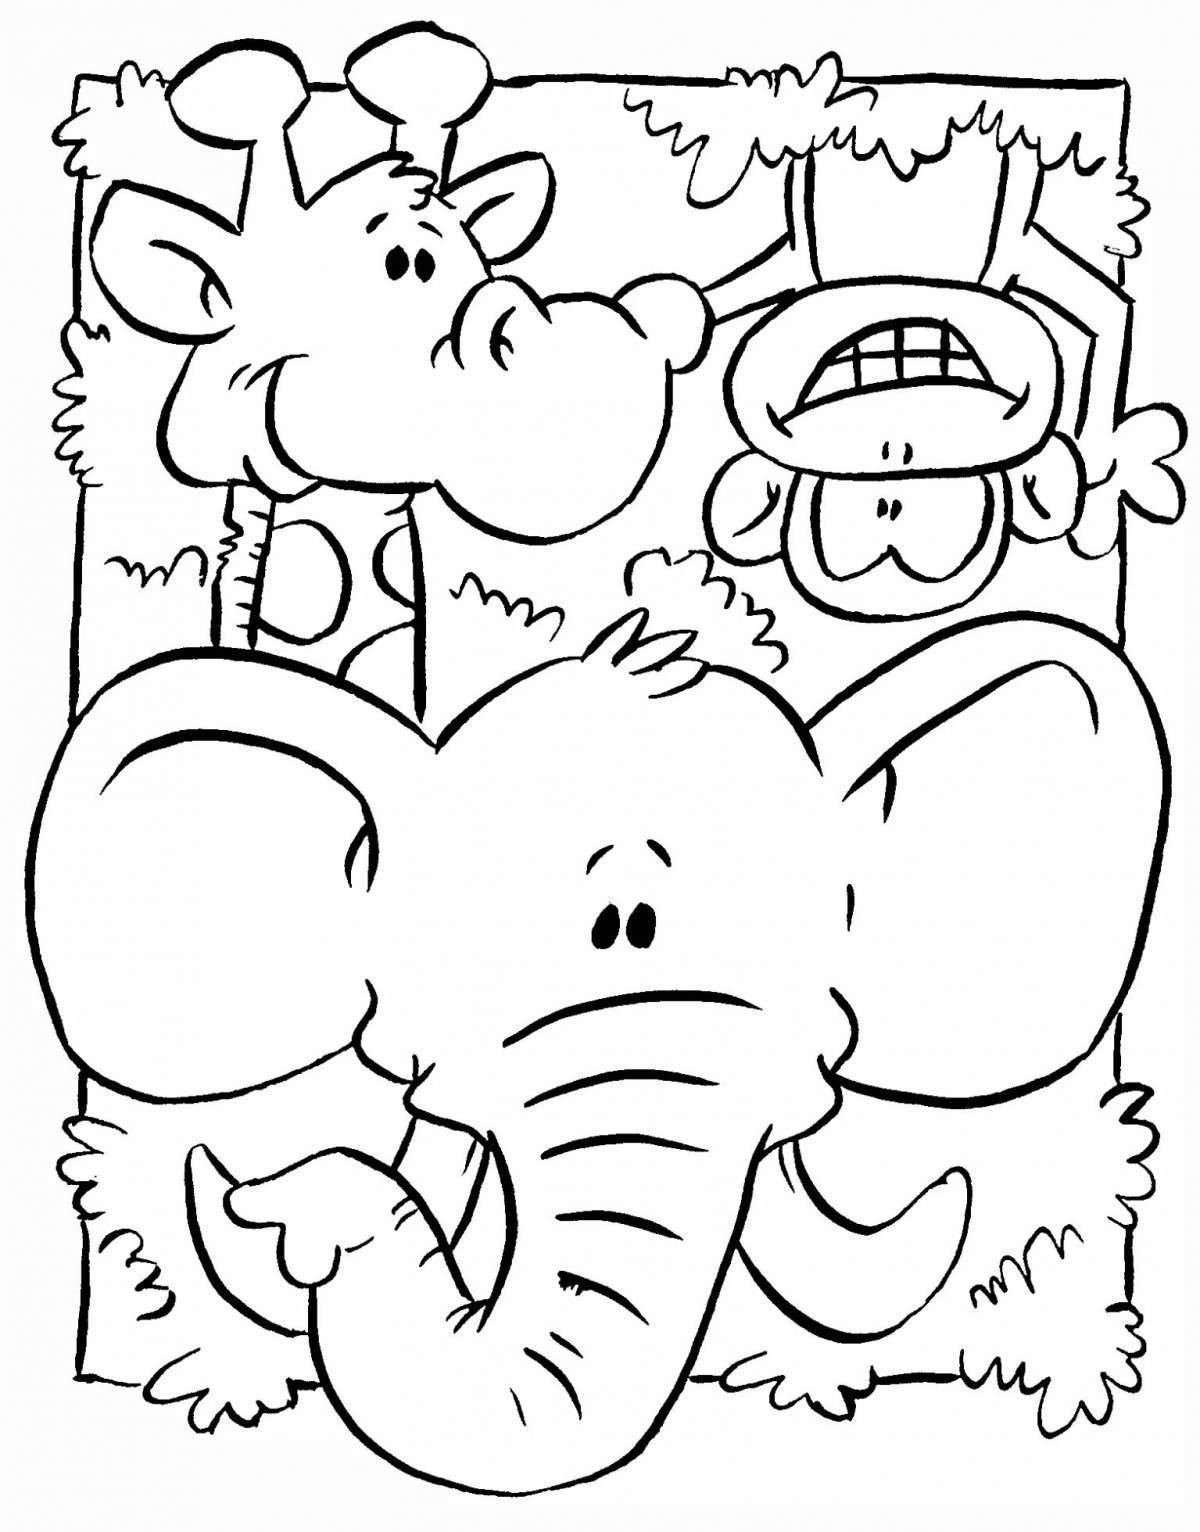 Amazing jungle animal coloring pages